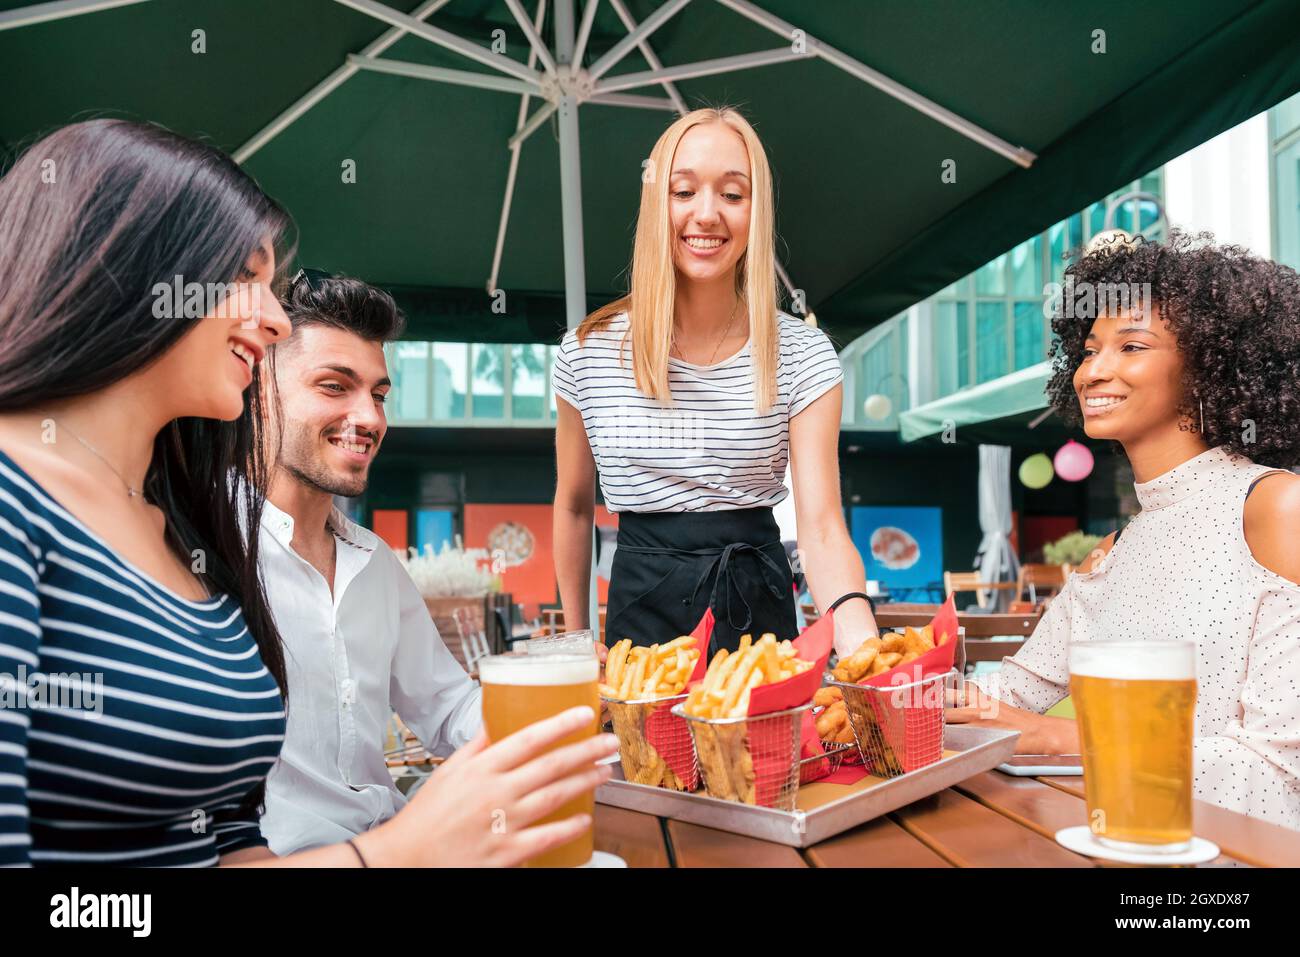 Happy smiling blond waitress serving fried potato chips at a pub table to a group of diverse young friends enjoying a cold beer together Stock Photo